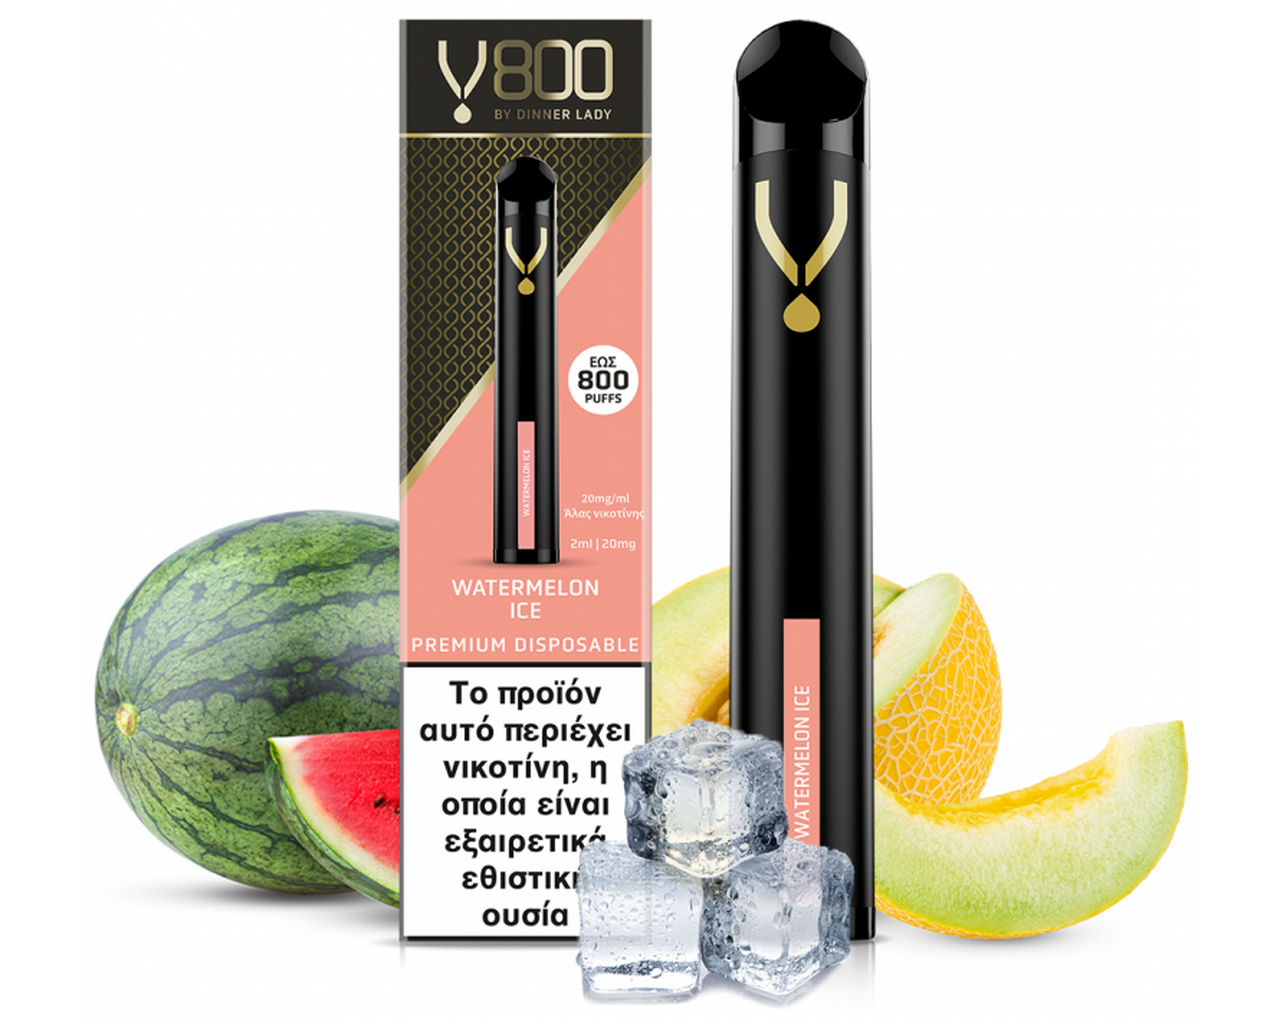 Dinner Lady V800 Disposable Watermelon Ice 2ml | 20mg